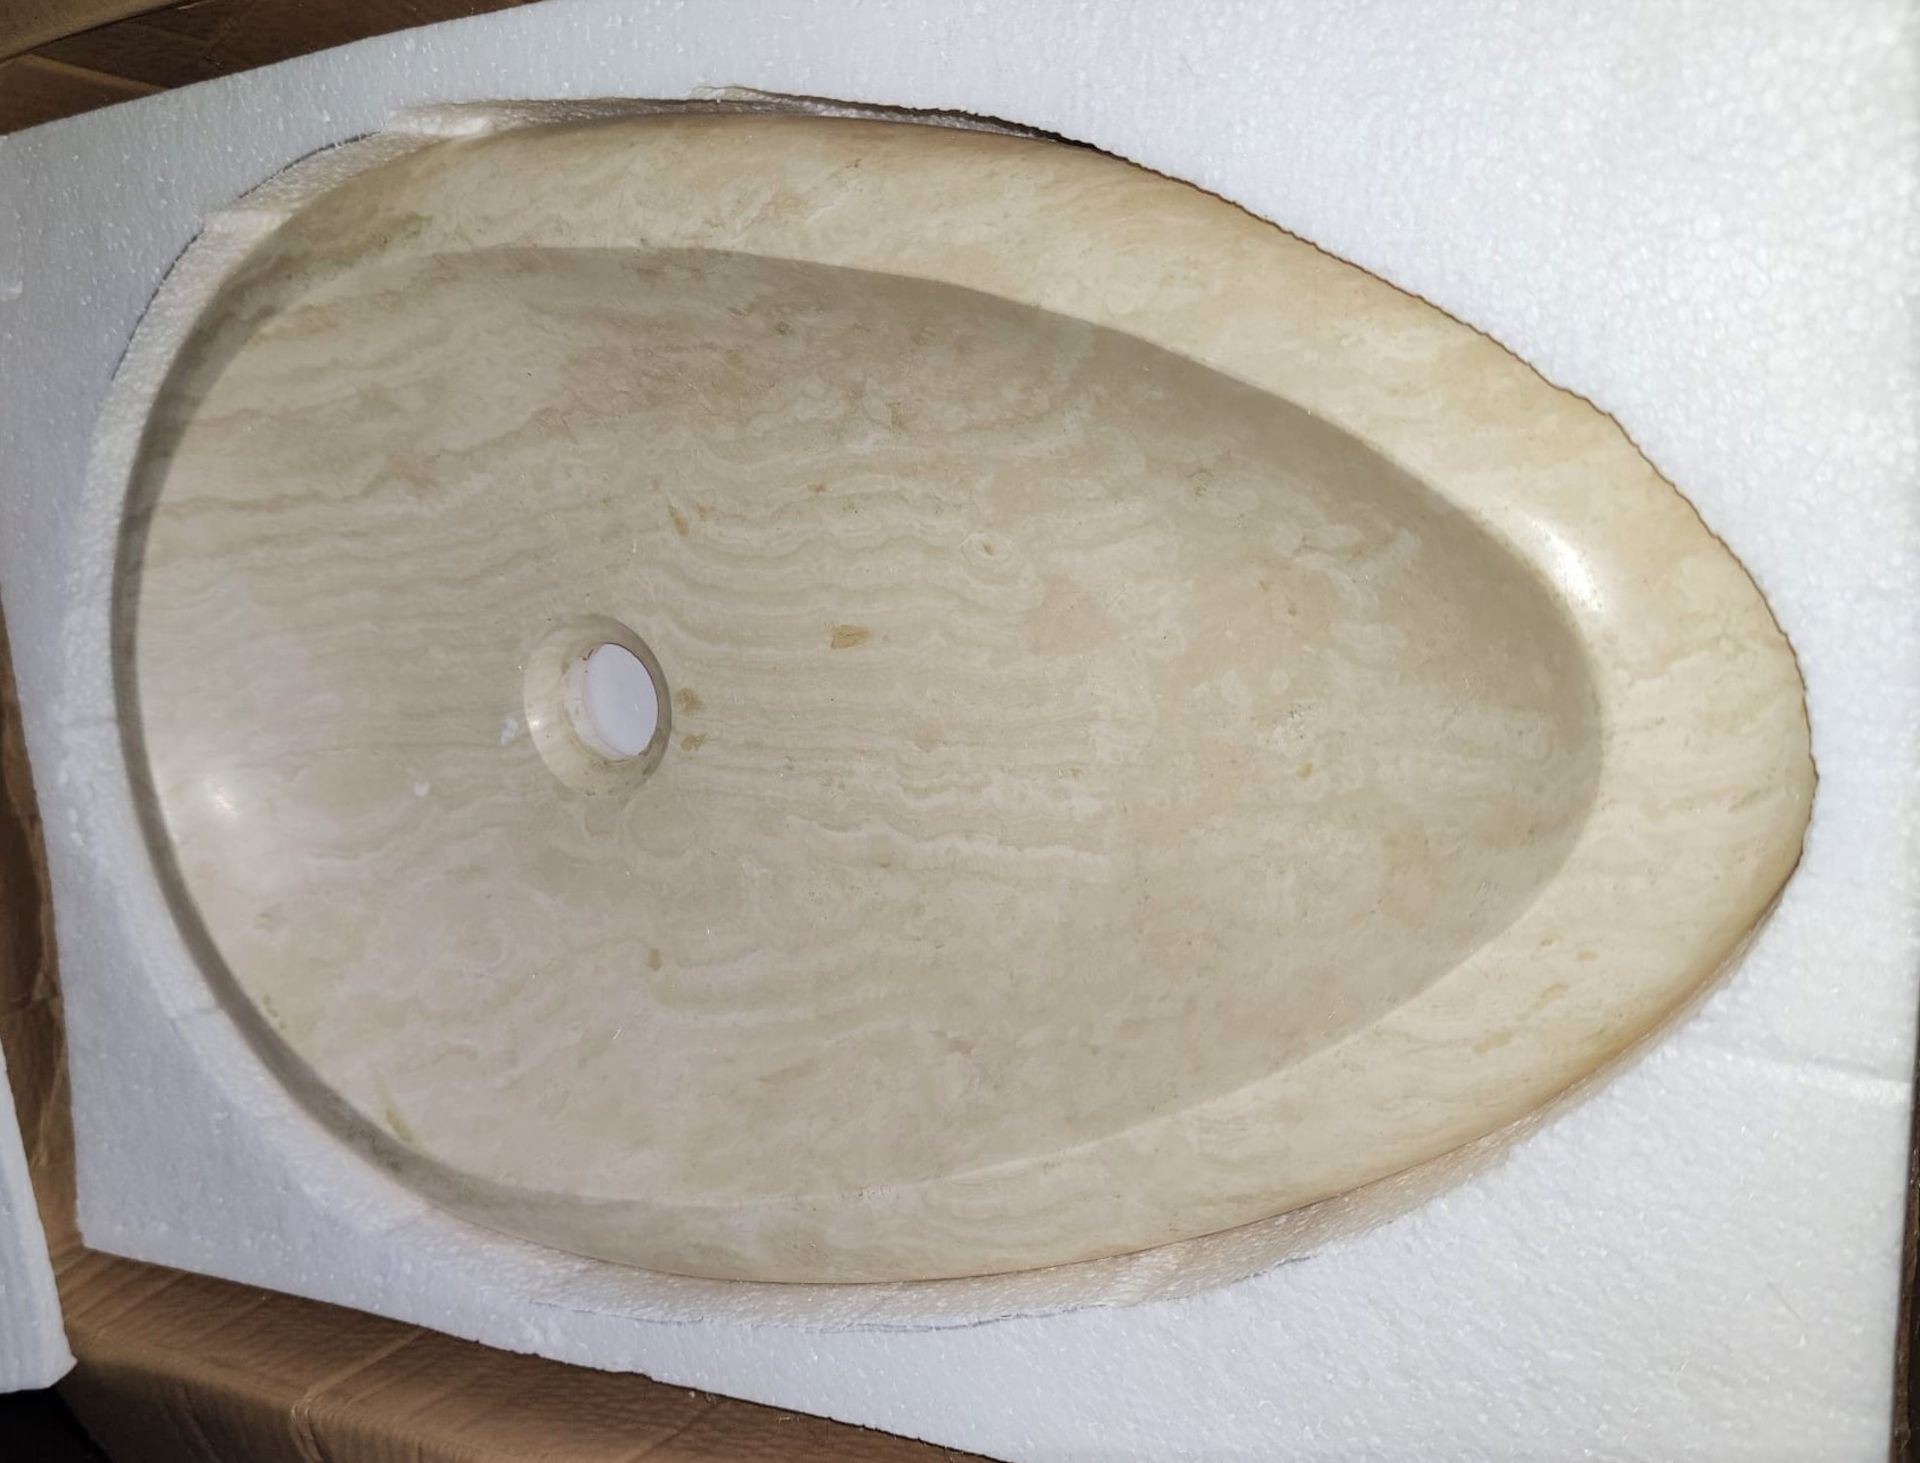 1 x Stonearth 'Pebble' Beige Travertine Stone Countertop Sink Basin - New Boxed Stock - RRP £560 - Image 3 of 3